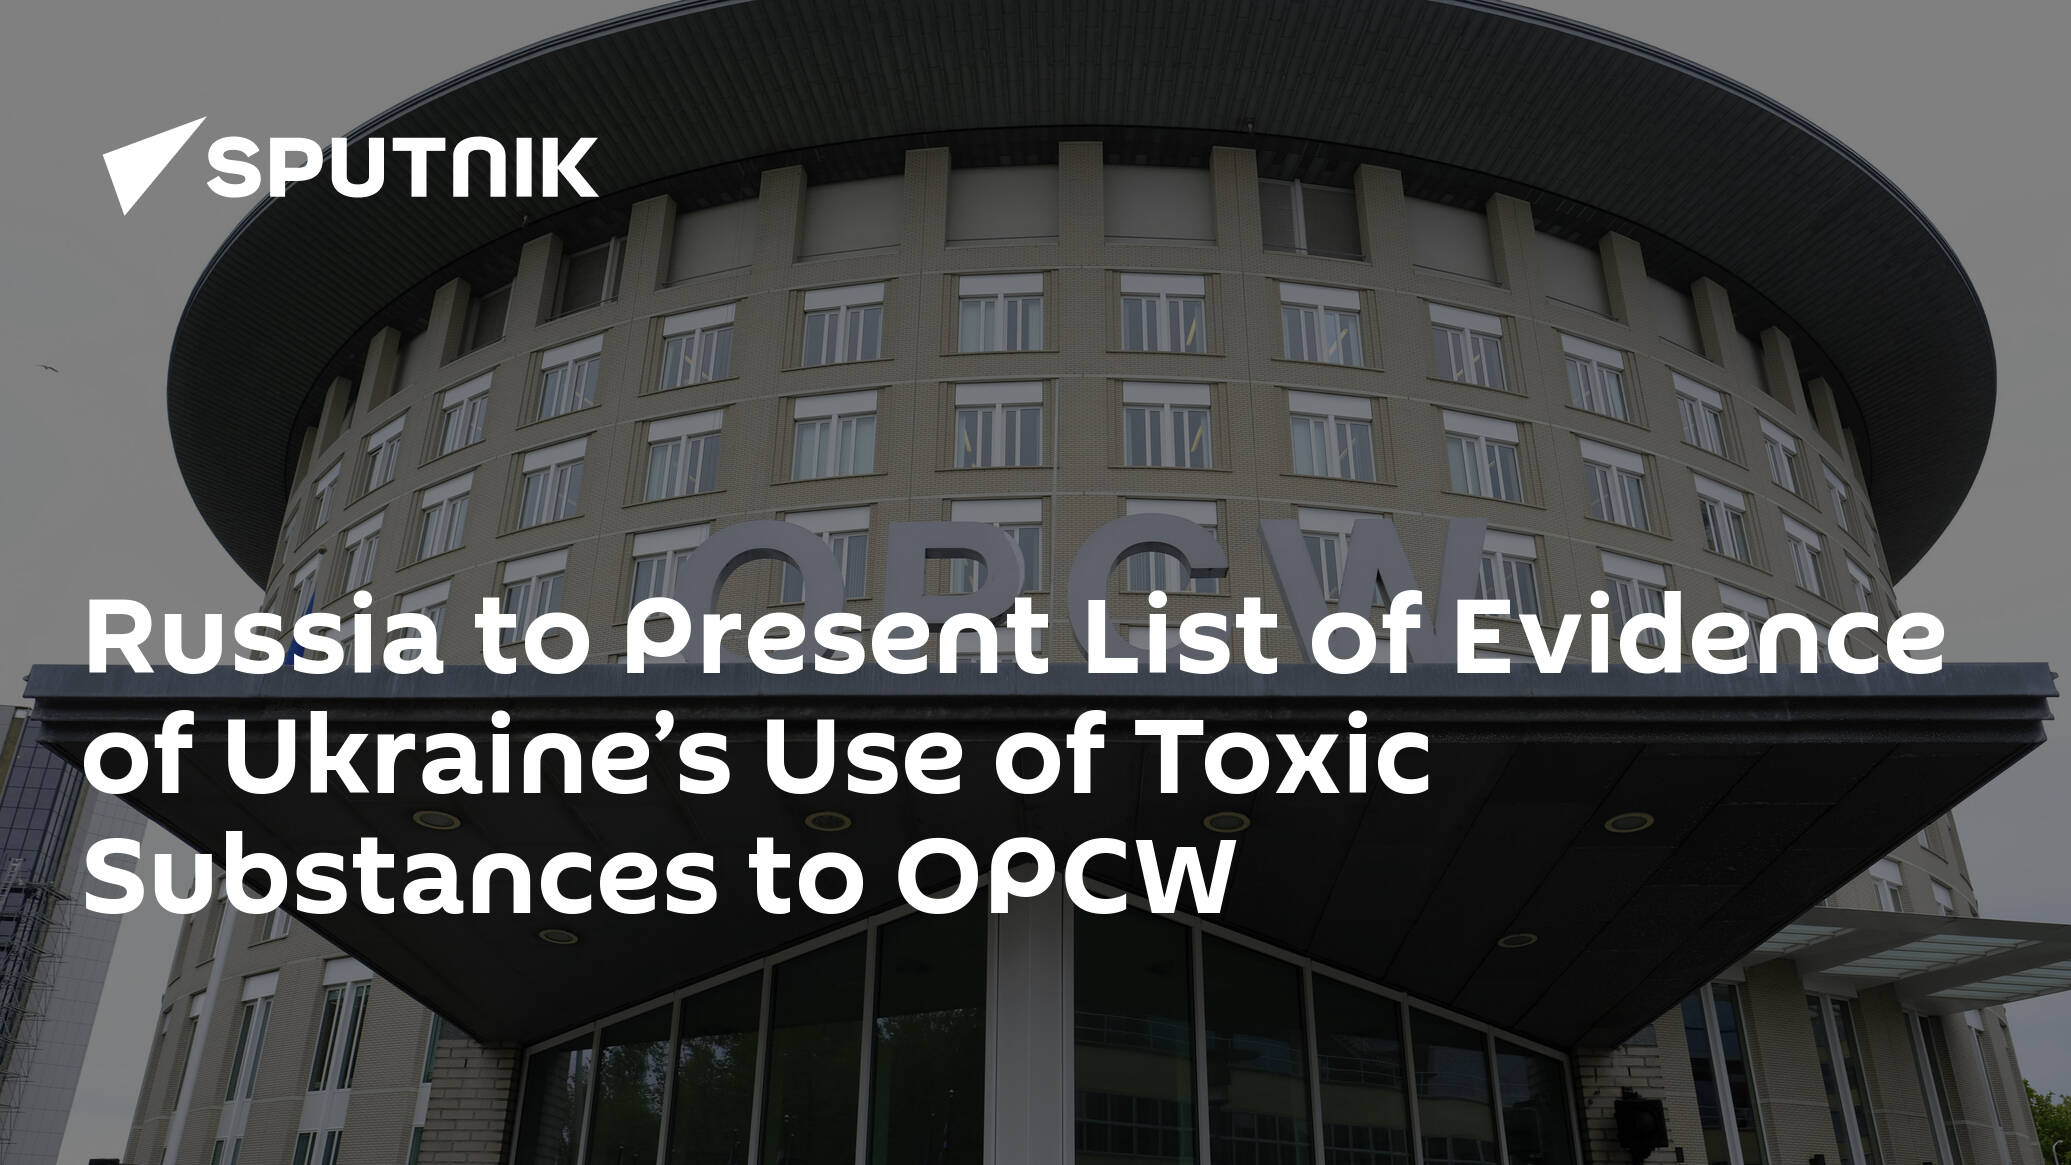 Russia to Present List of Evidence of Ukraine’s Use of Toxic Substances to OPCW